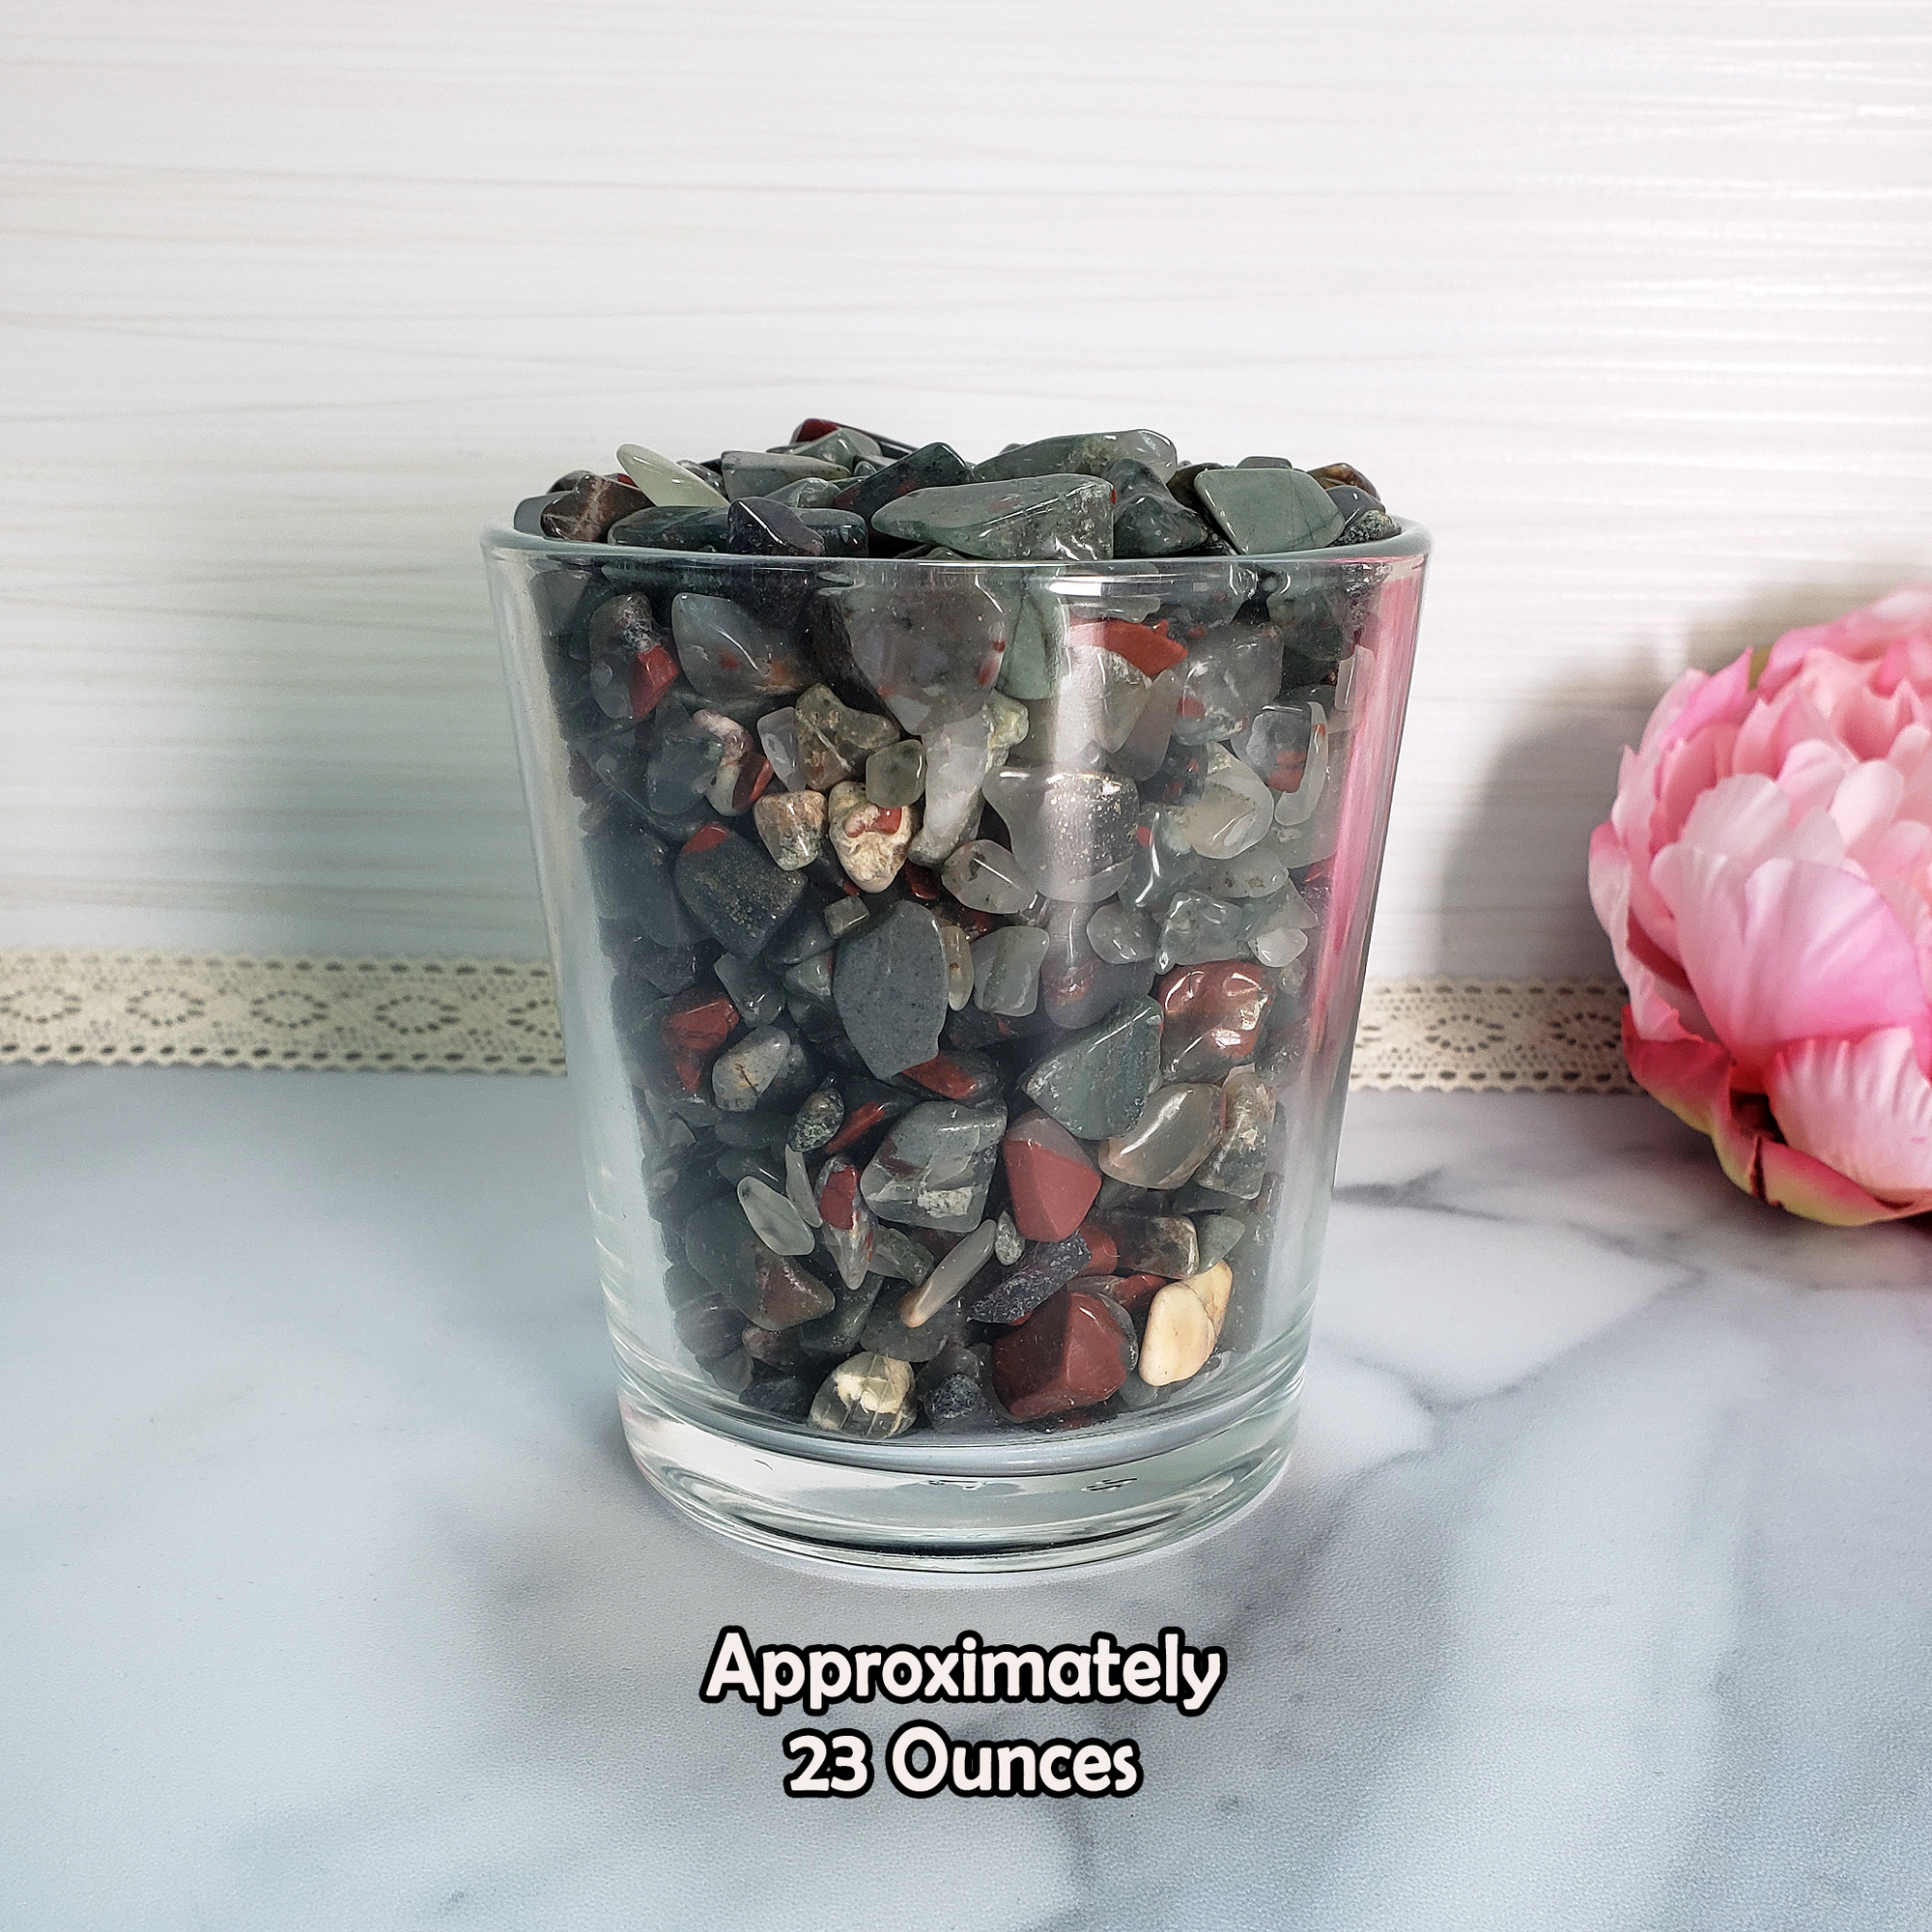 Seftonite Bloodstone Natural Gemstone Chips By the Ounce - 23 Ounces Bloodstone Crystal Chips in Glass Tumbler